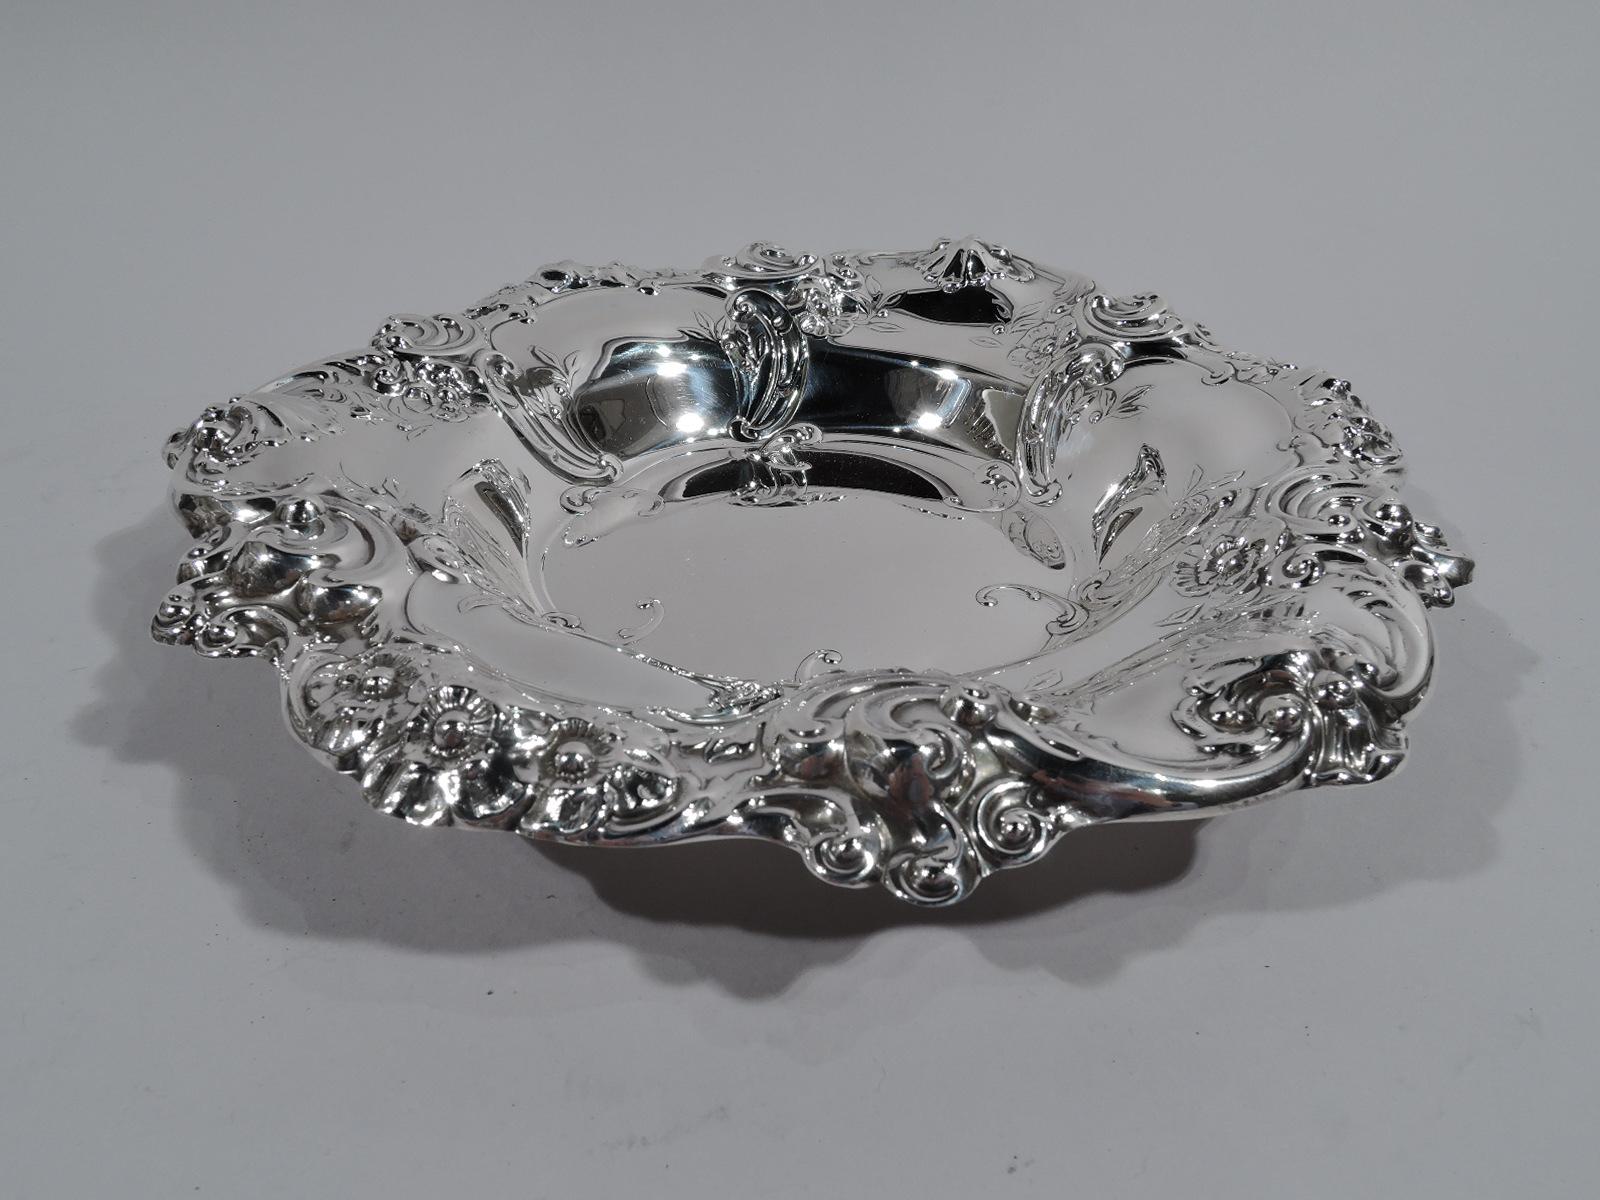 Old-fashioned sterling silver bowl. Made by Gorham in Providence in 1955. Round well with tapering sides and scrolled rim. Embossed shells, scrolls, and flowers. Pretty and tactile. Fully marked including date code and no. 818. Weight: 16 troy